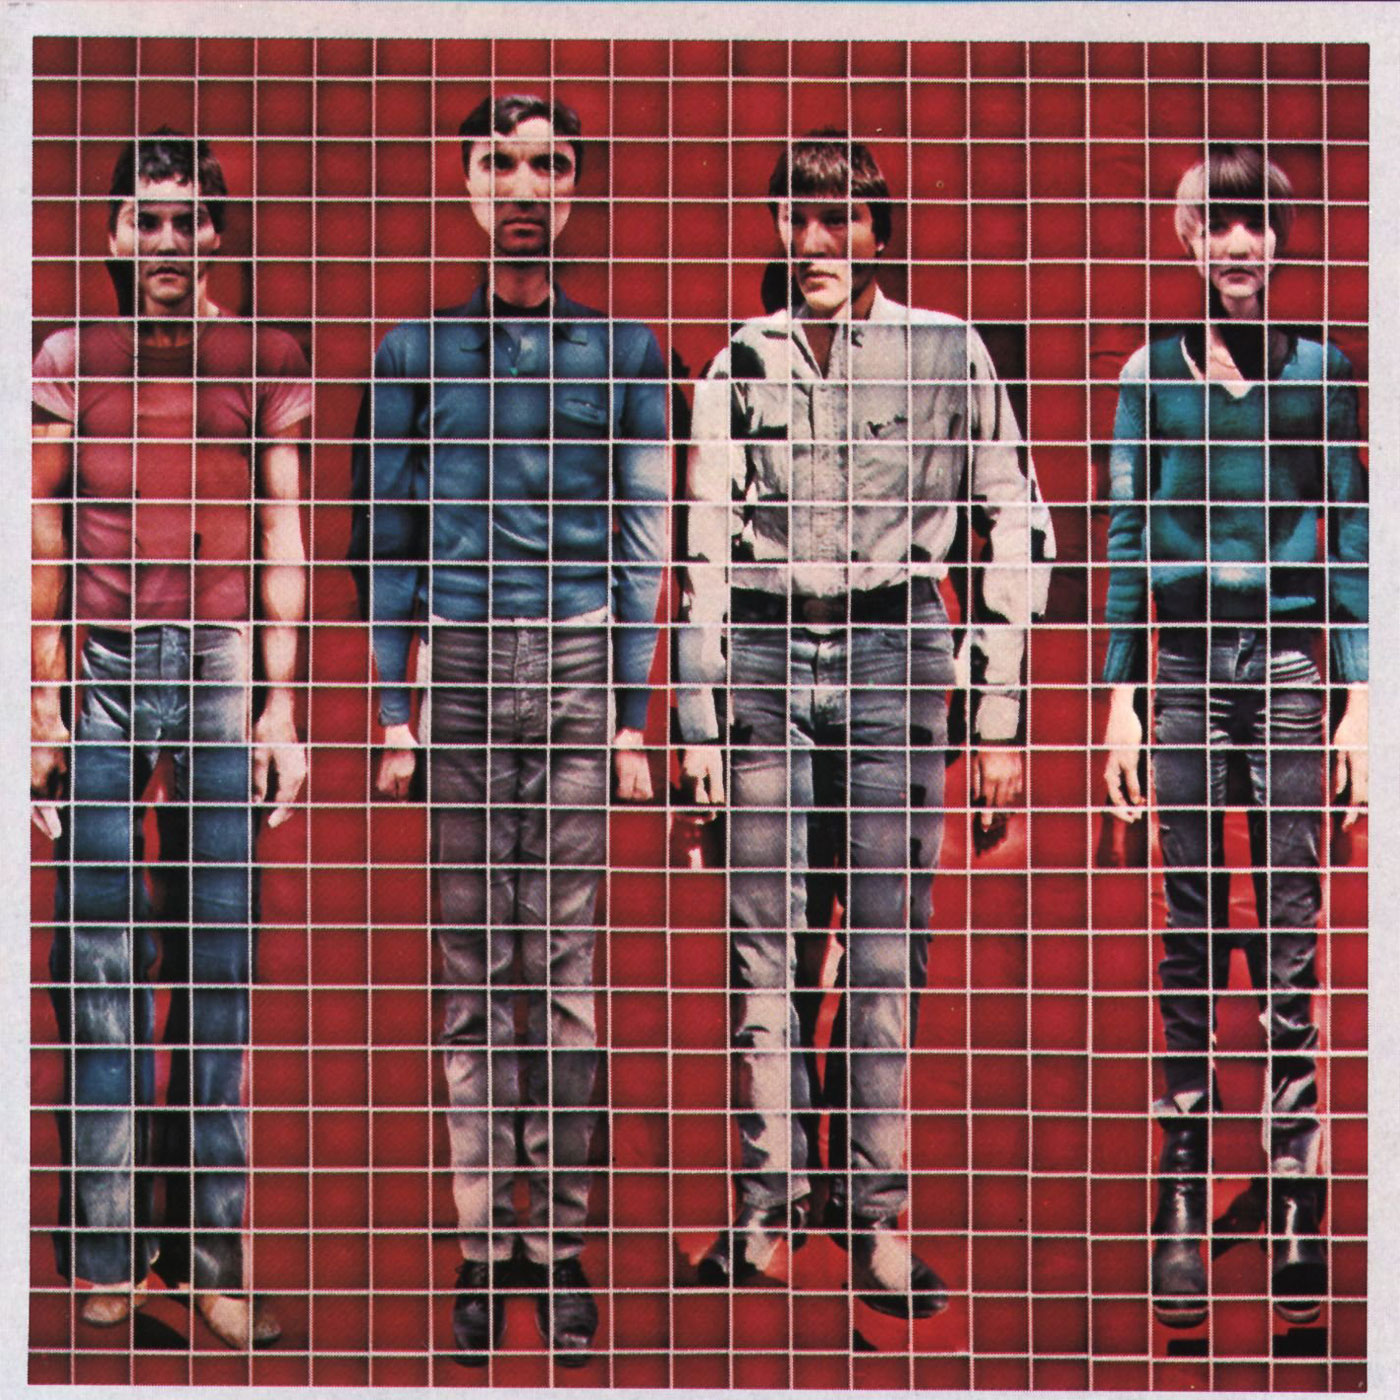 413 Talking Heads – More Songs About Buildings and Food